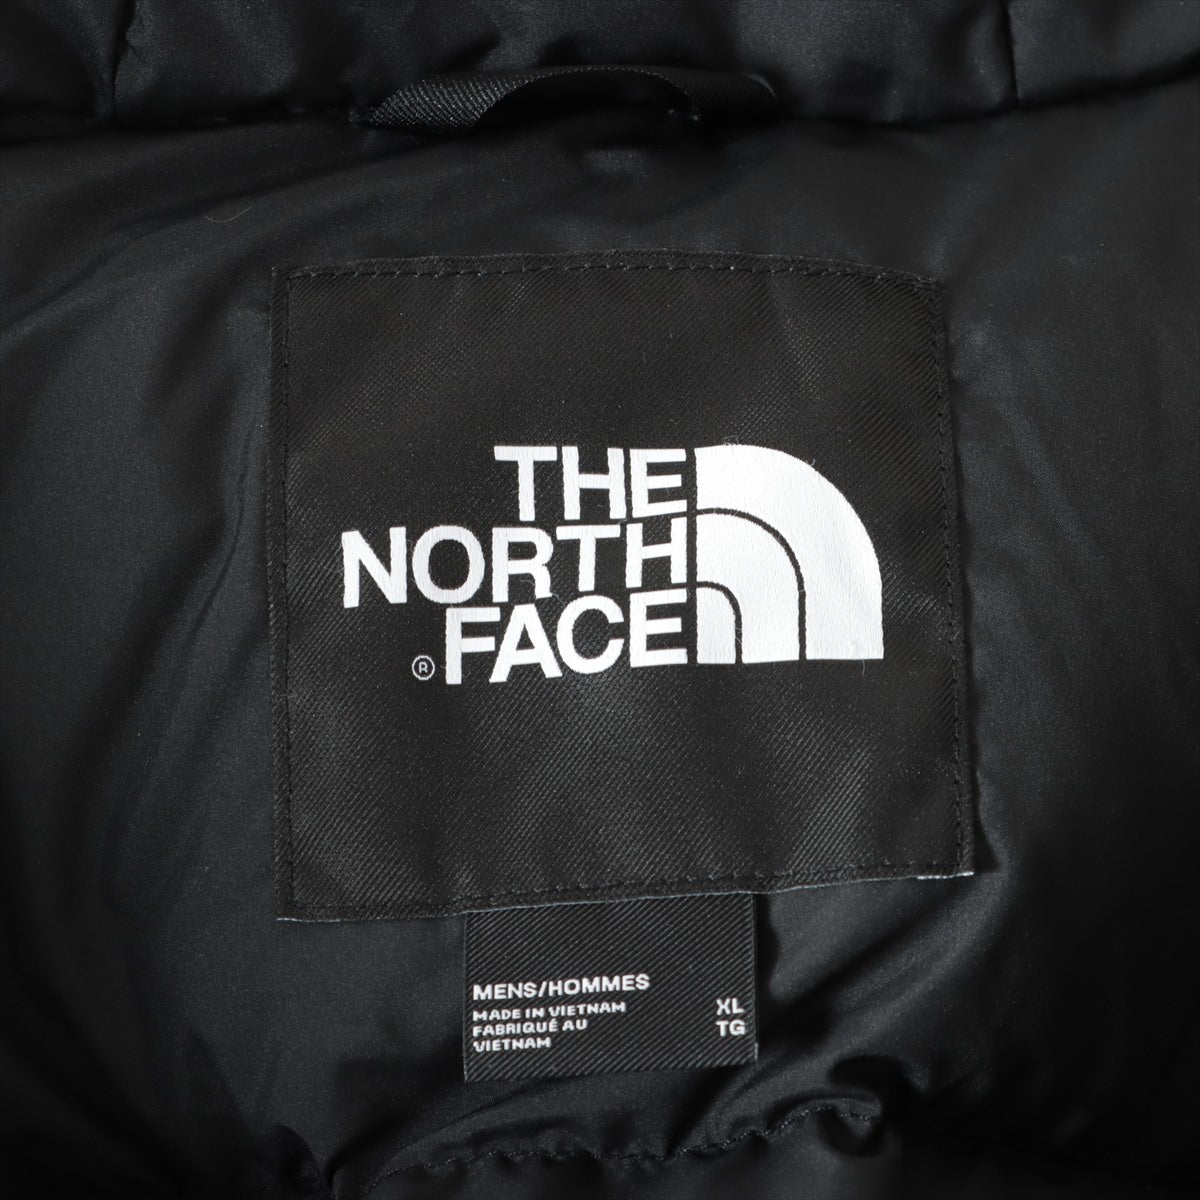 The North Face Nylon Down jacket XL Men's Navy blue  NF0A5GD9